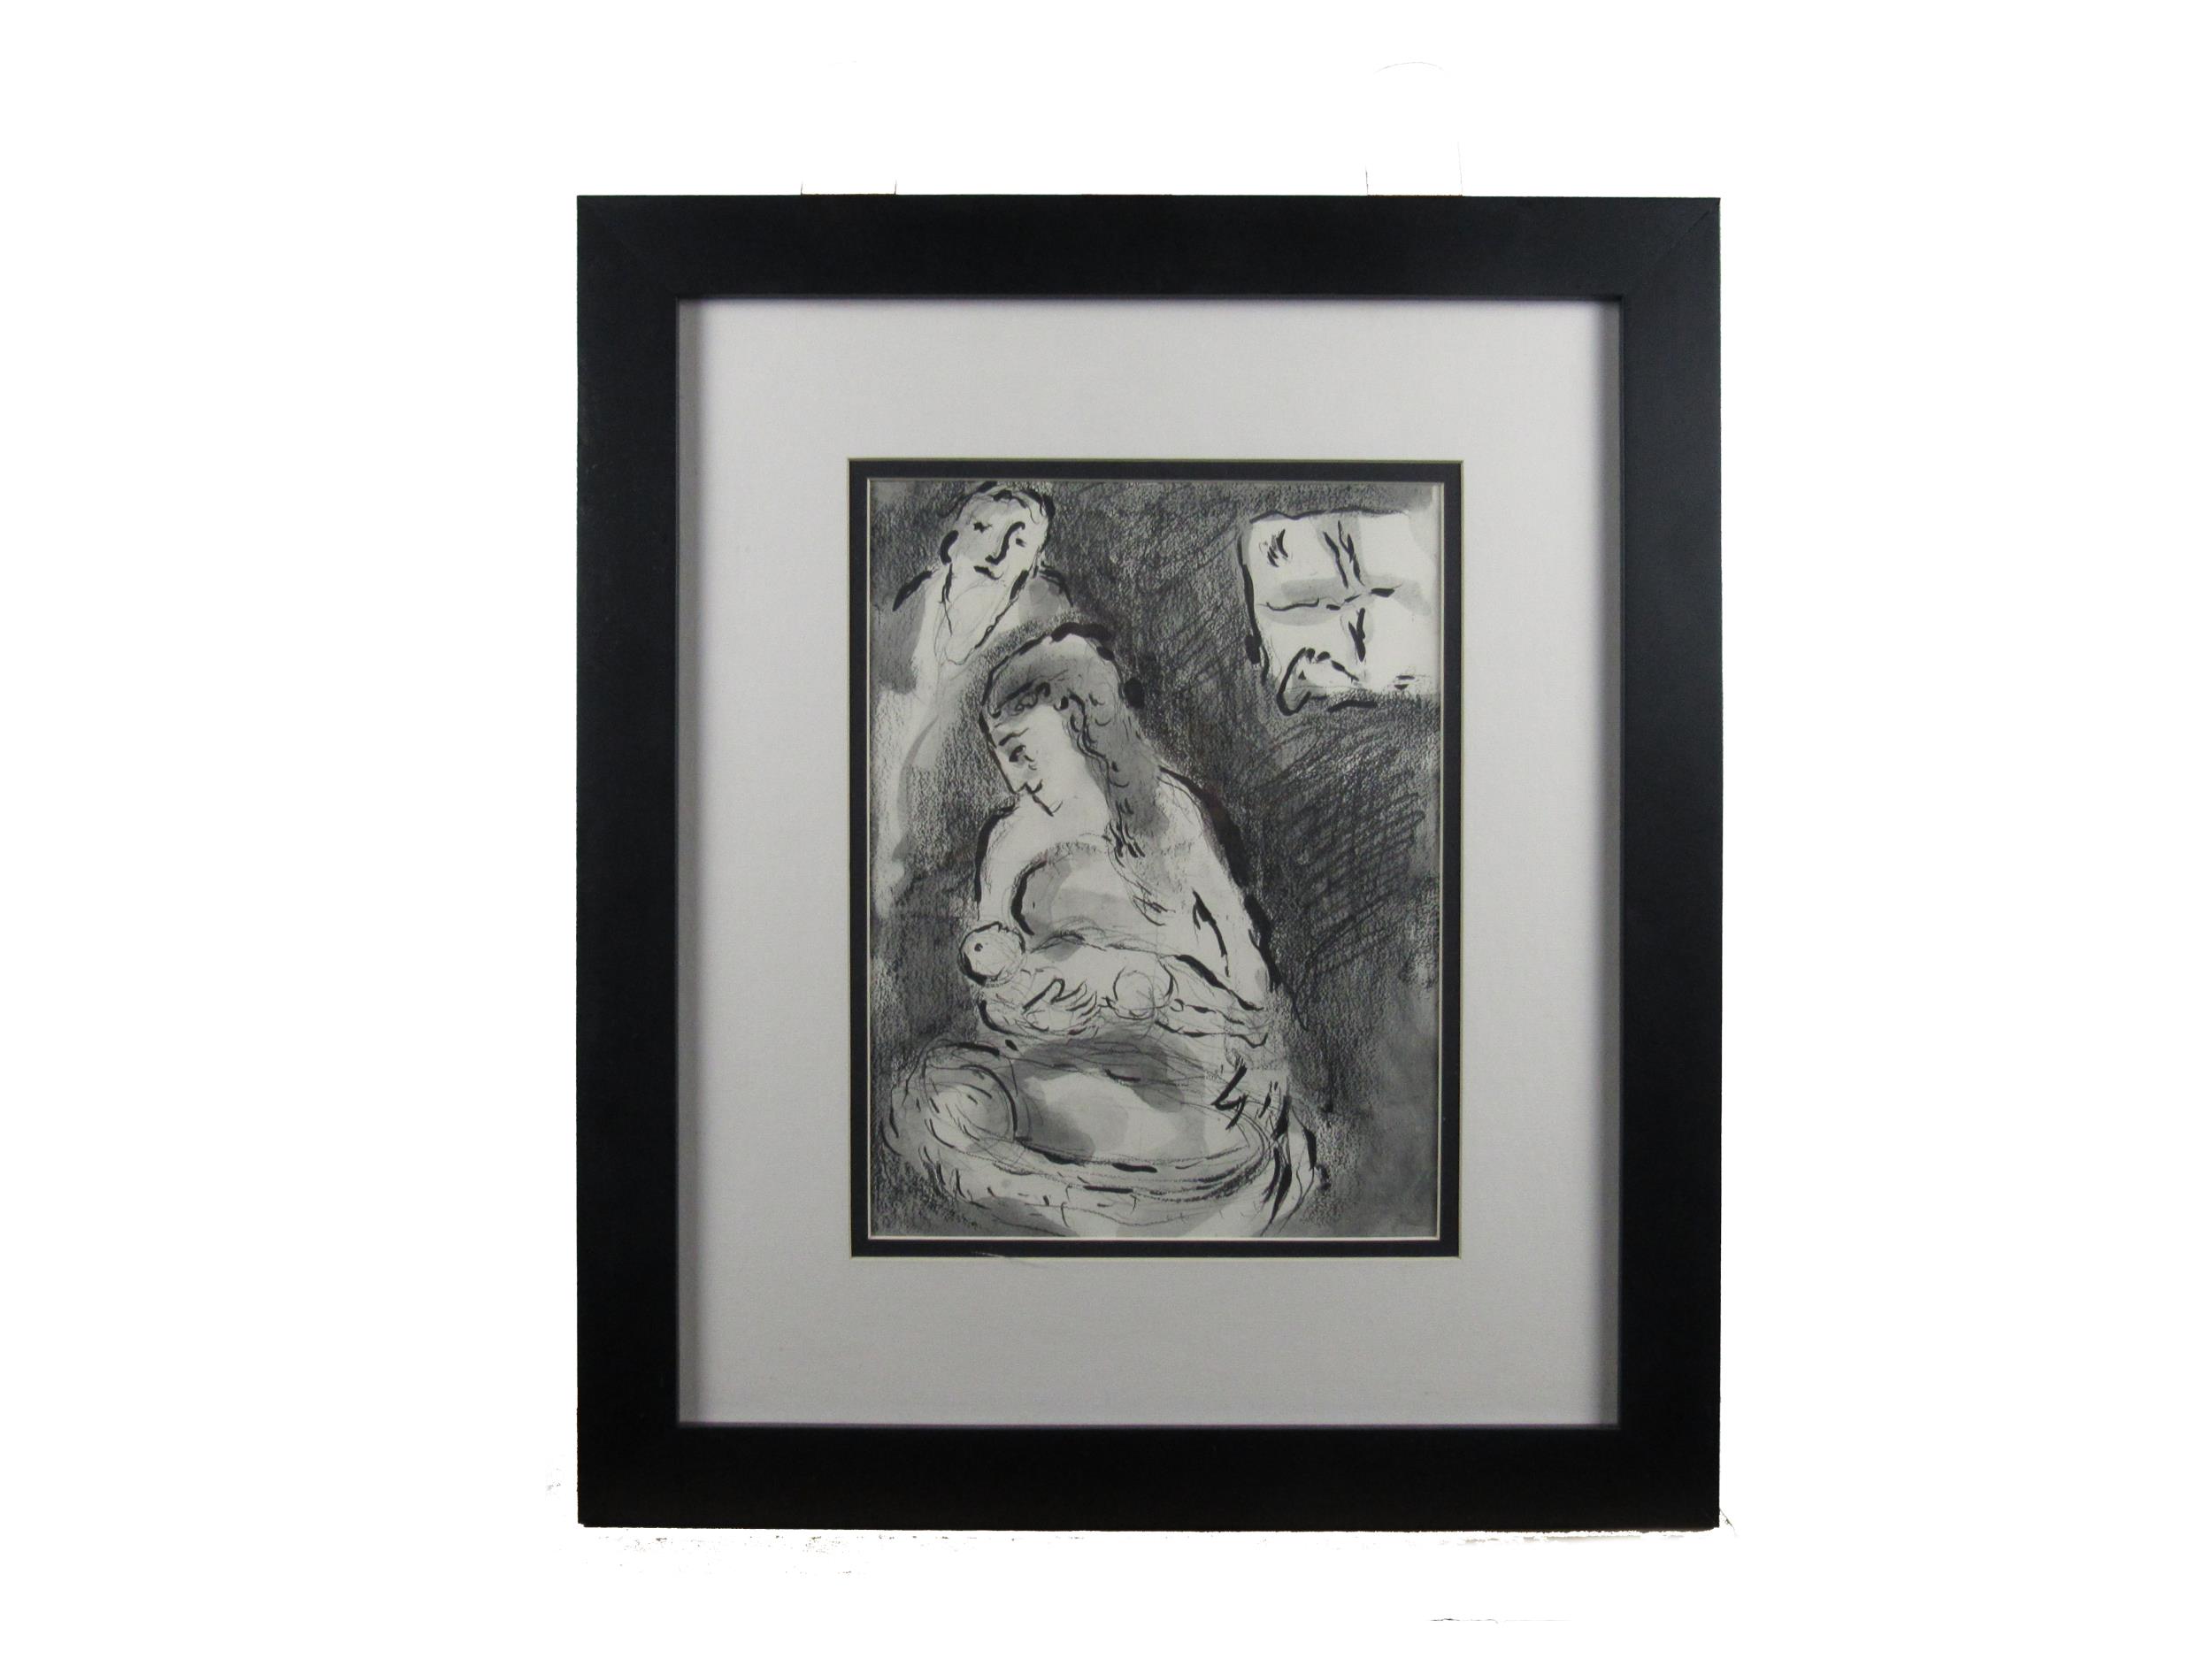 Marc Chagall (1887-1985) "Mother and Child," monochrome heliogravure, 1960, approx. 31cms x 24cms (